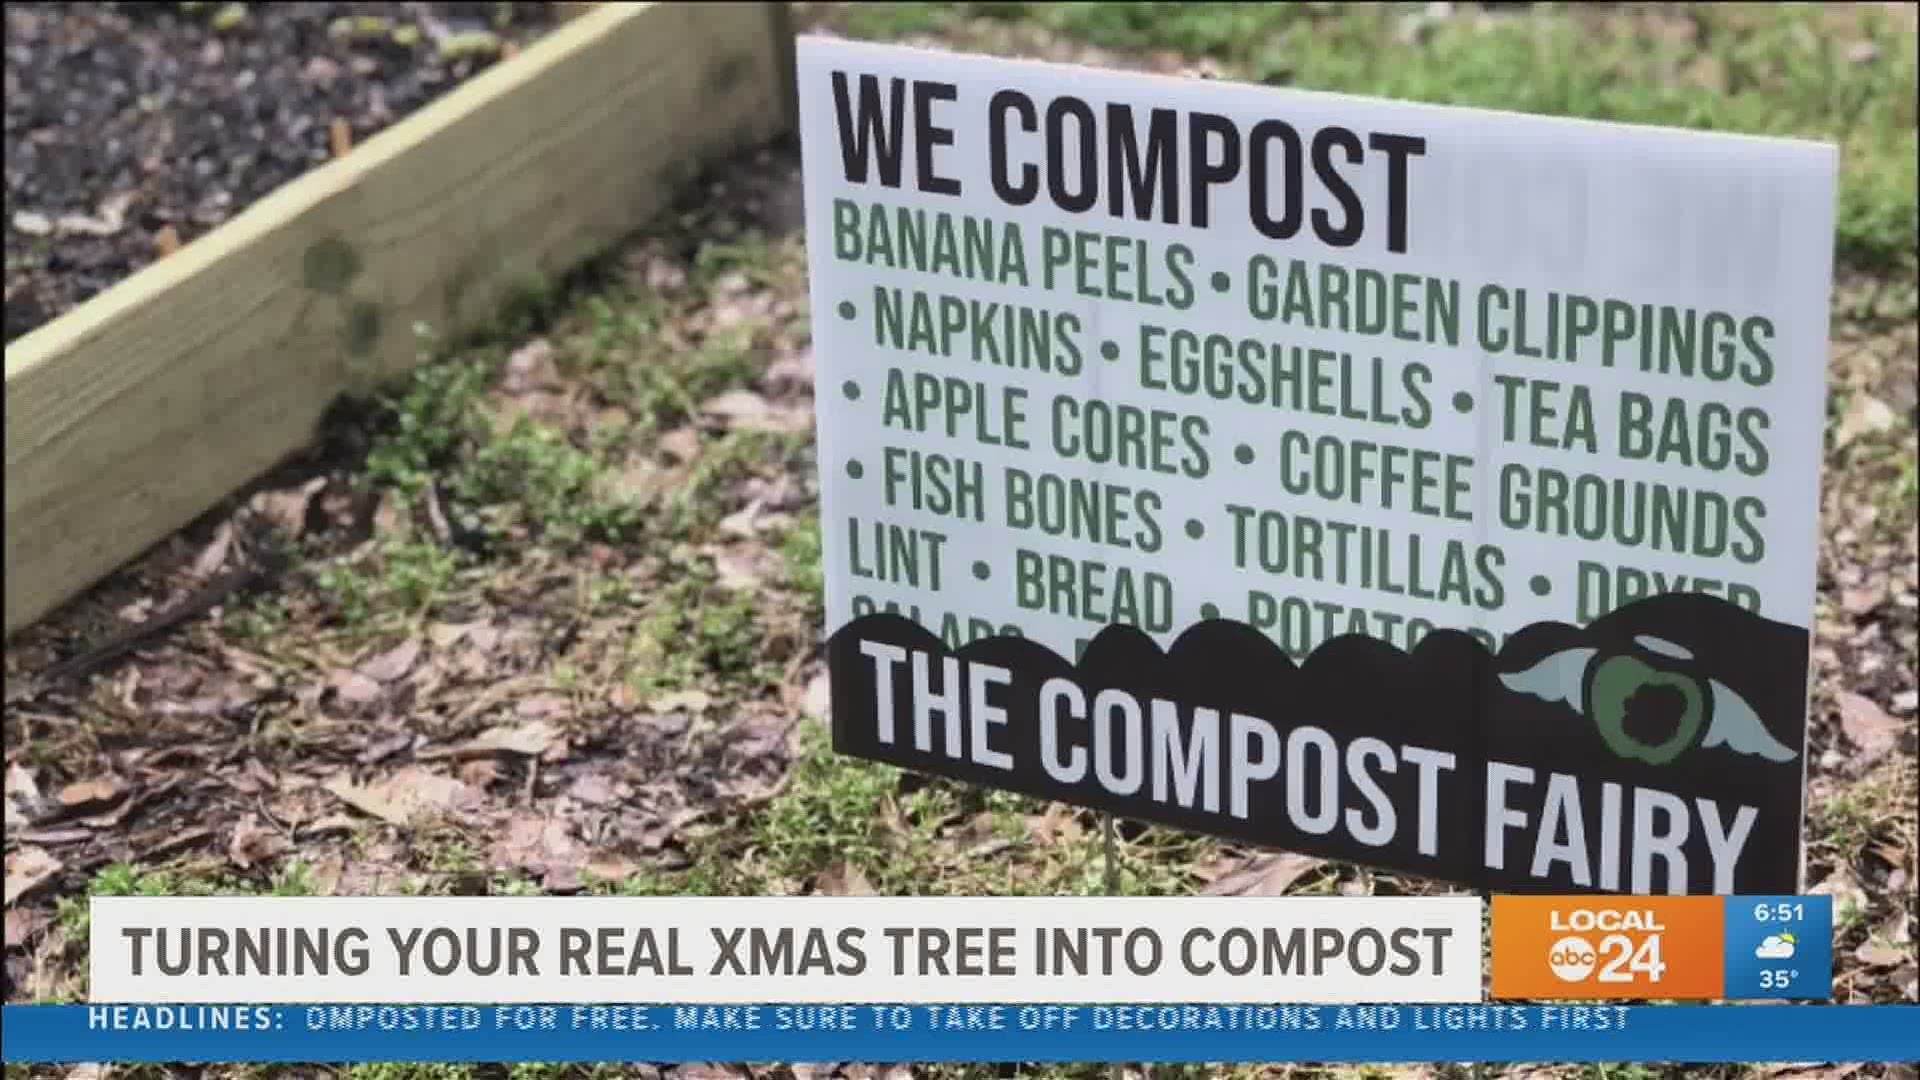 The Compost Fairy has been busy during this pandemic with growing interest and they want your Christmas trees too!